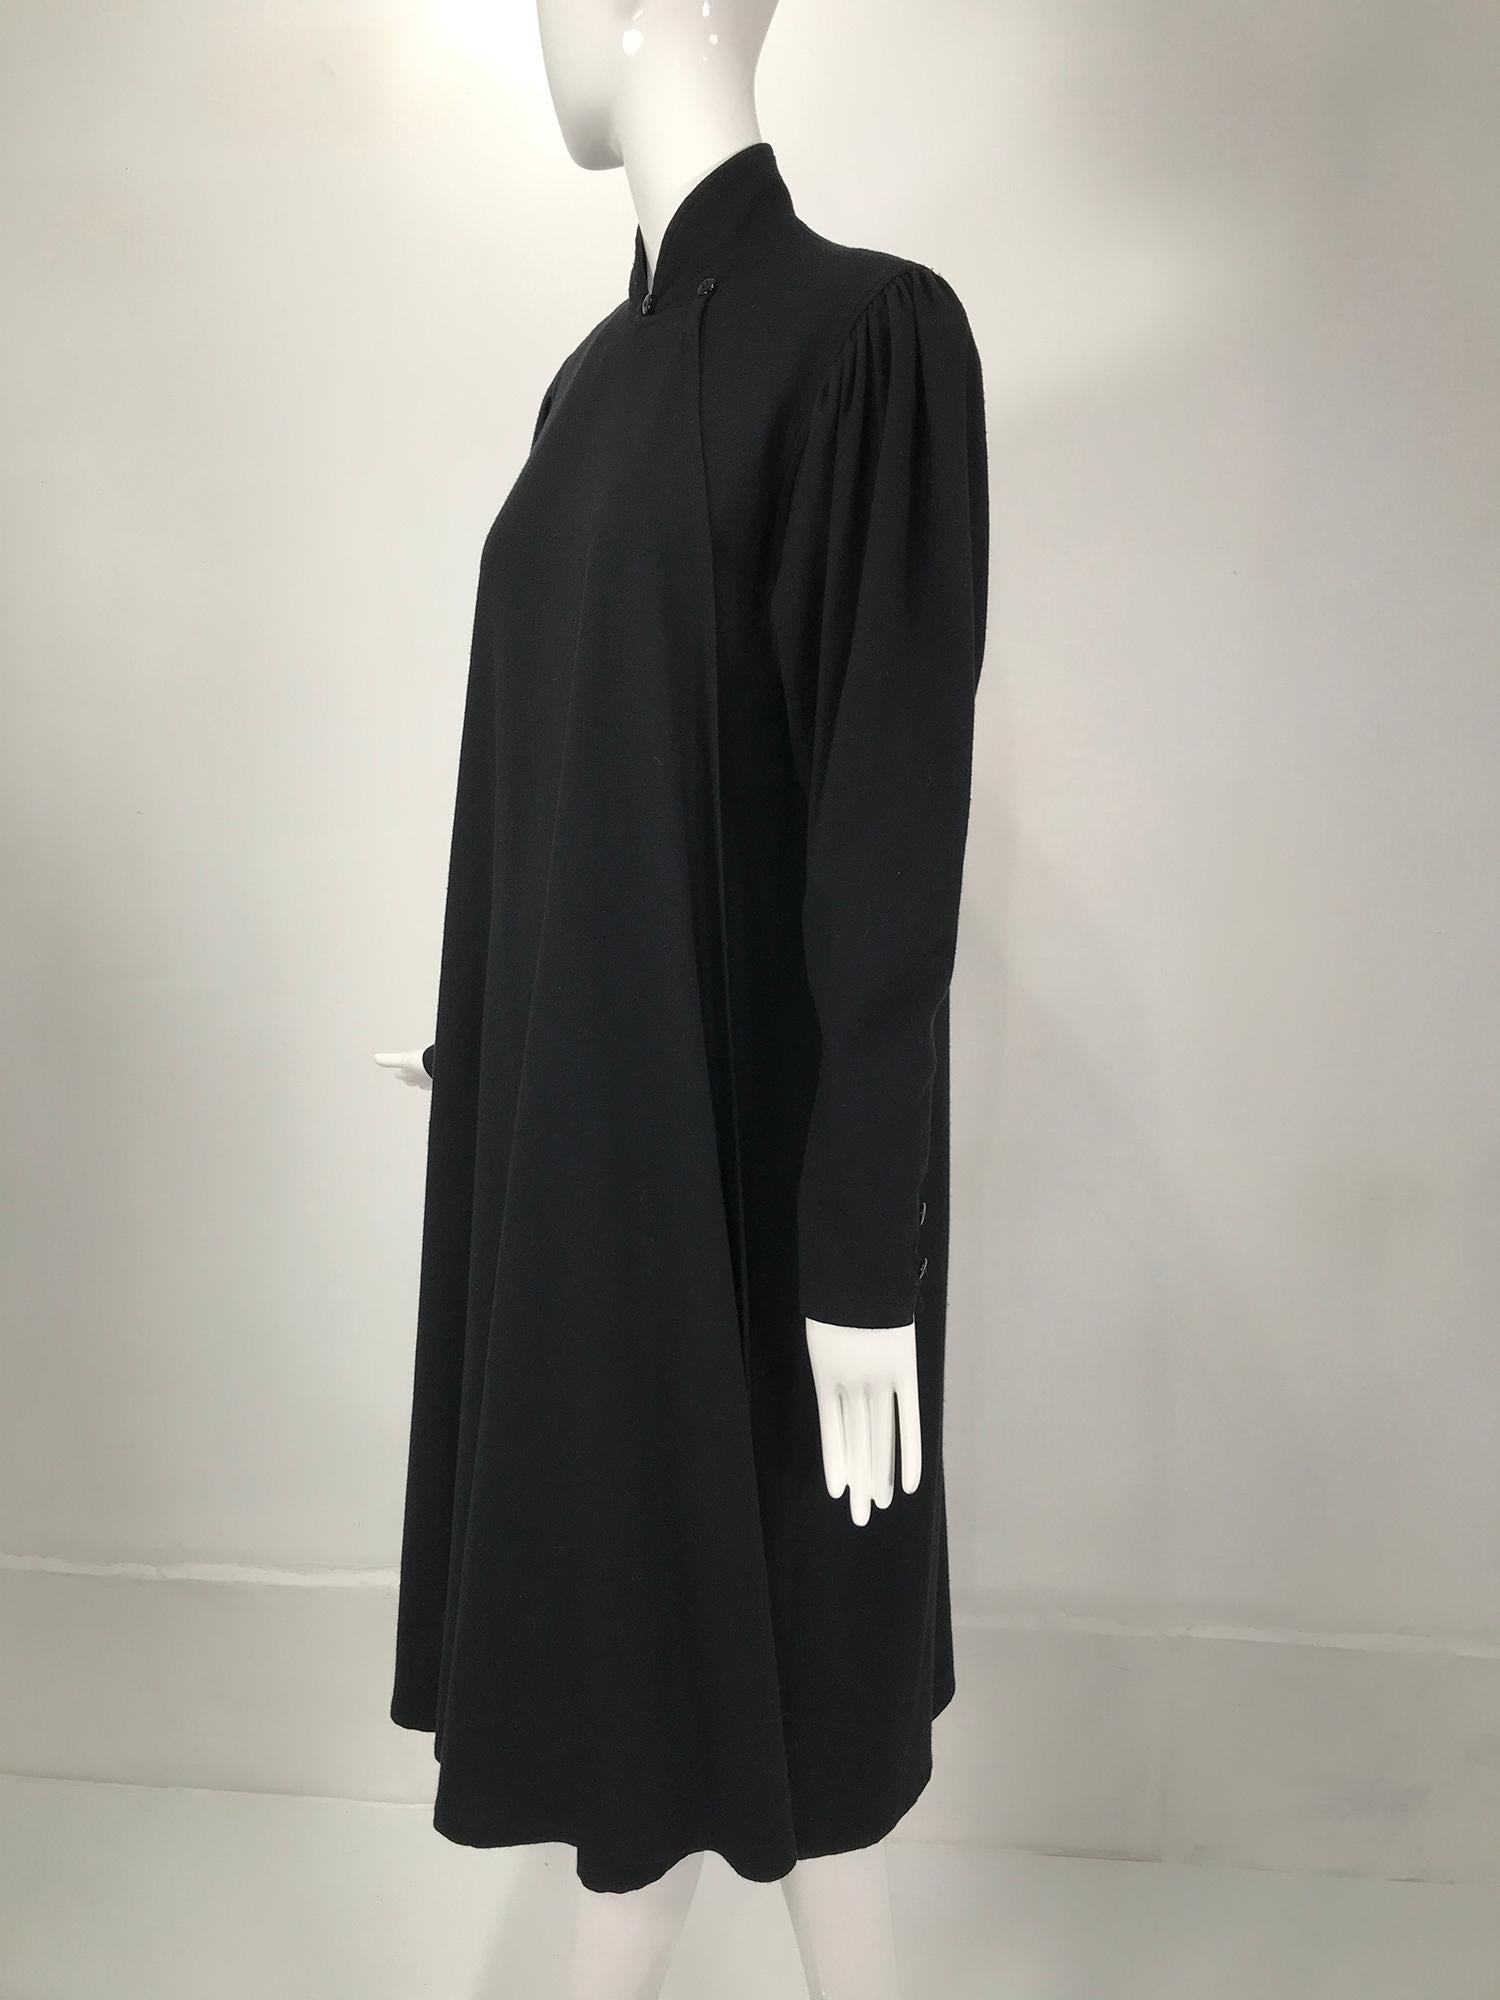 Kenzo Double Face Black Wool Cheongsam Style Coat 1980s In Good Condition For Sale In West Palm Beach, FL